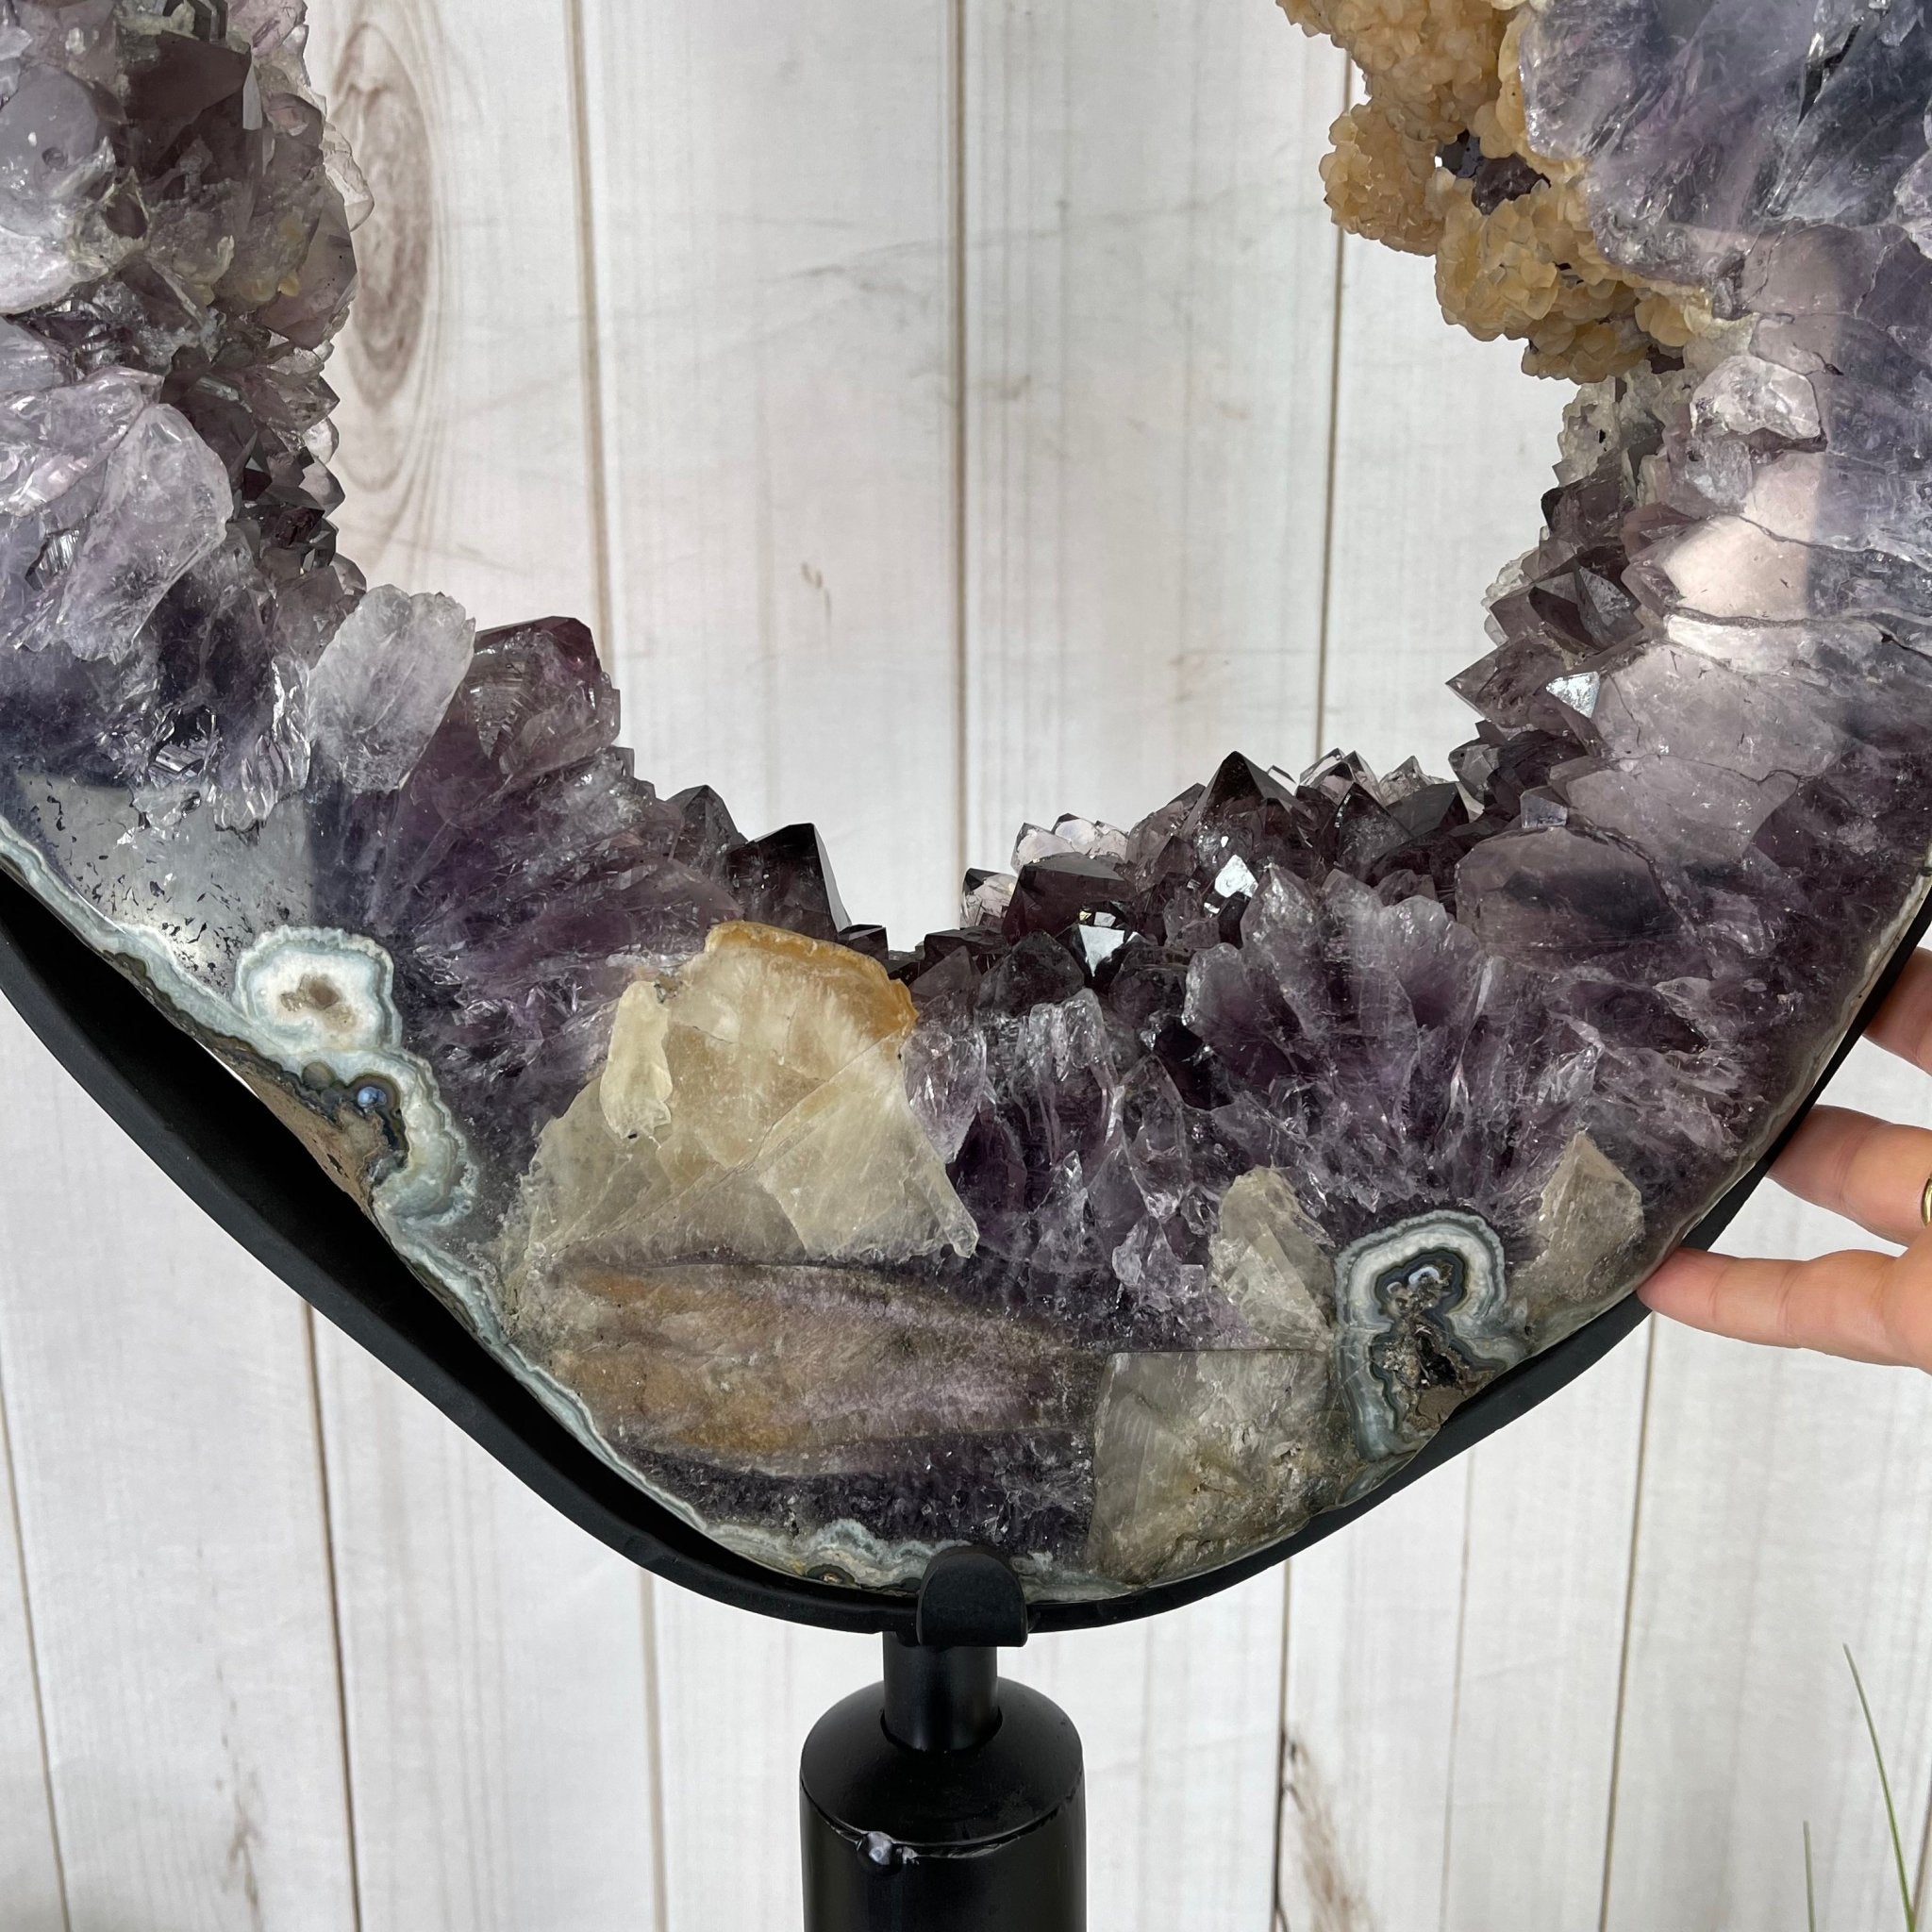 Extra Quality Brazilian Amethyst Crystal Portal on a Tall Rotating Stand, 92.6 lbs & 70.75" tall Model #5604-0105 by Brazil Gems - Brazil GemsBrazil GemsExtra Quality Brazilian Amethyst Crystal Portal on a Tall Rotating Stand, 92.6 lbs & 70.75" tall Model #5604-0105 by Brazil GemsPortals on Rotating Bases5604-0105